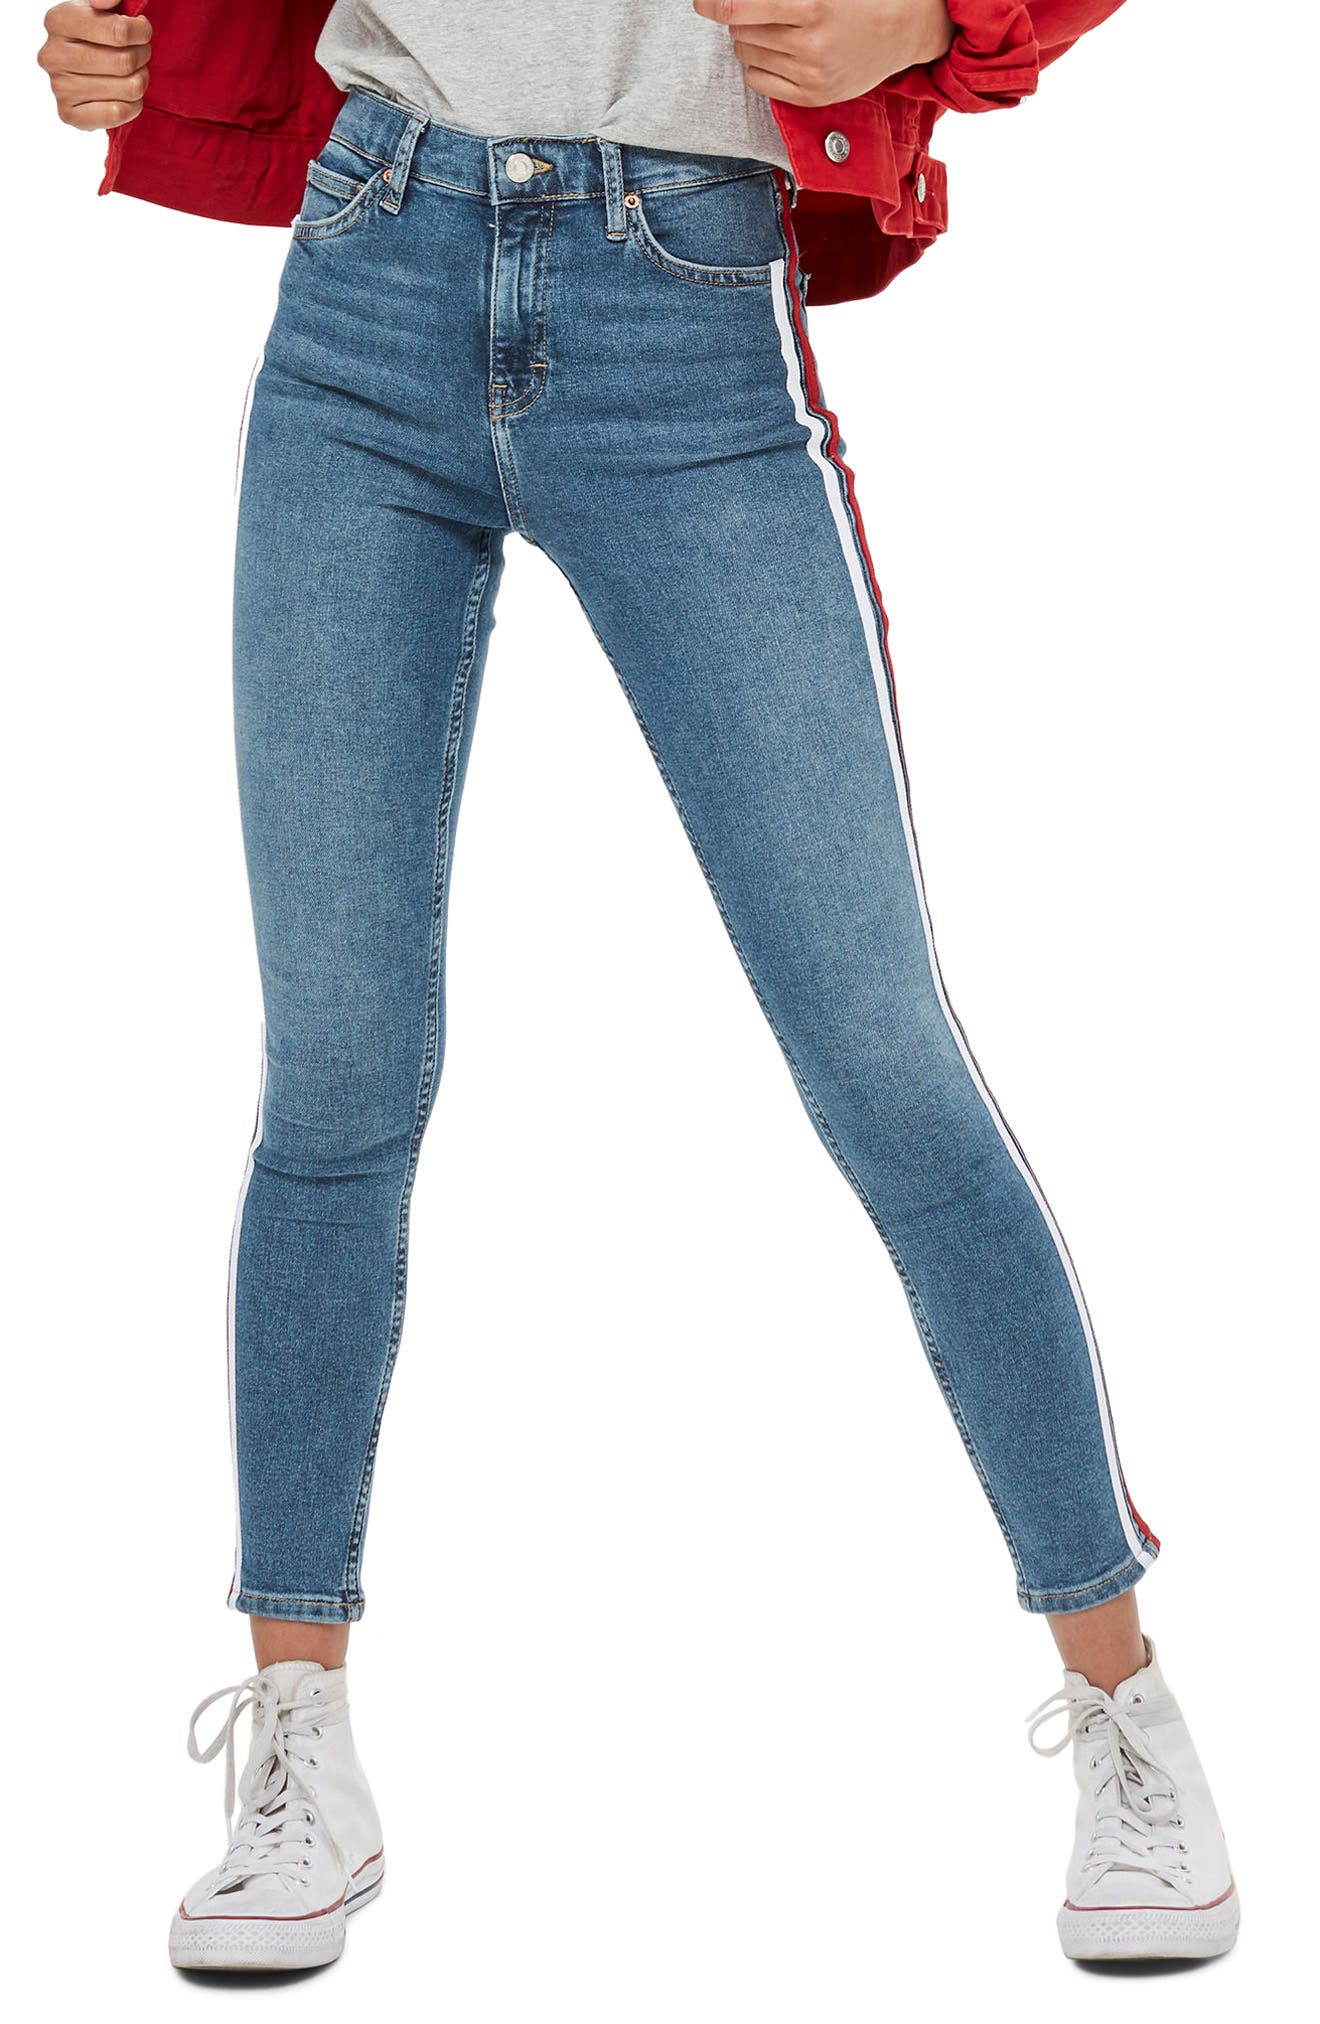 jeans with a stripe down the side